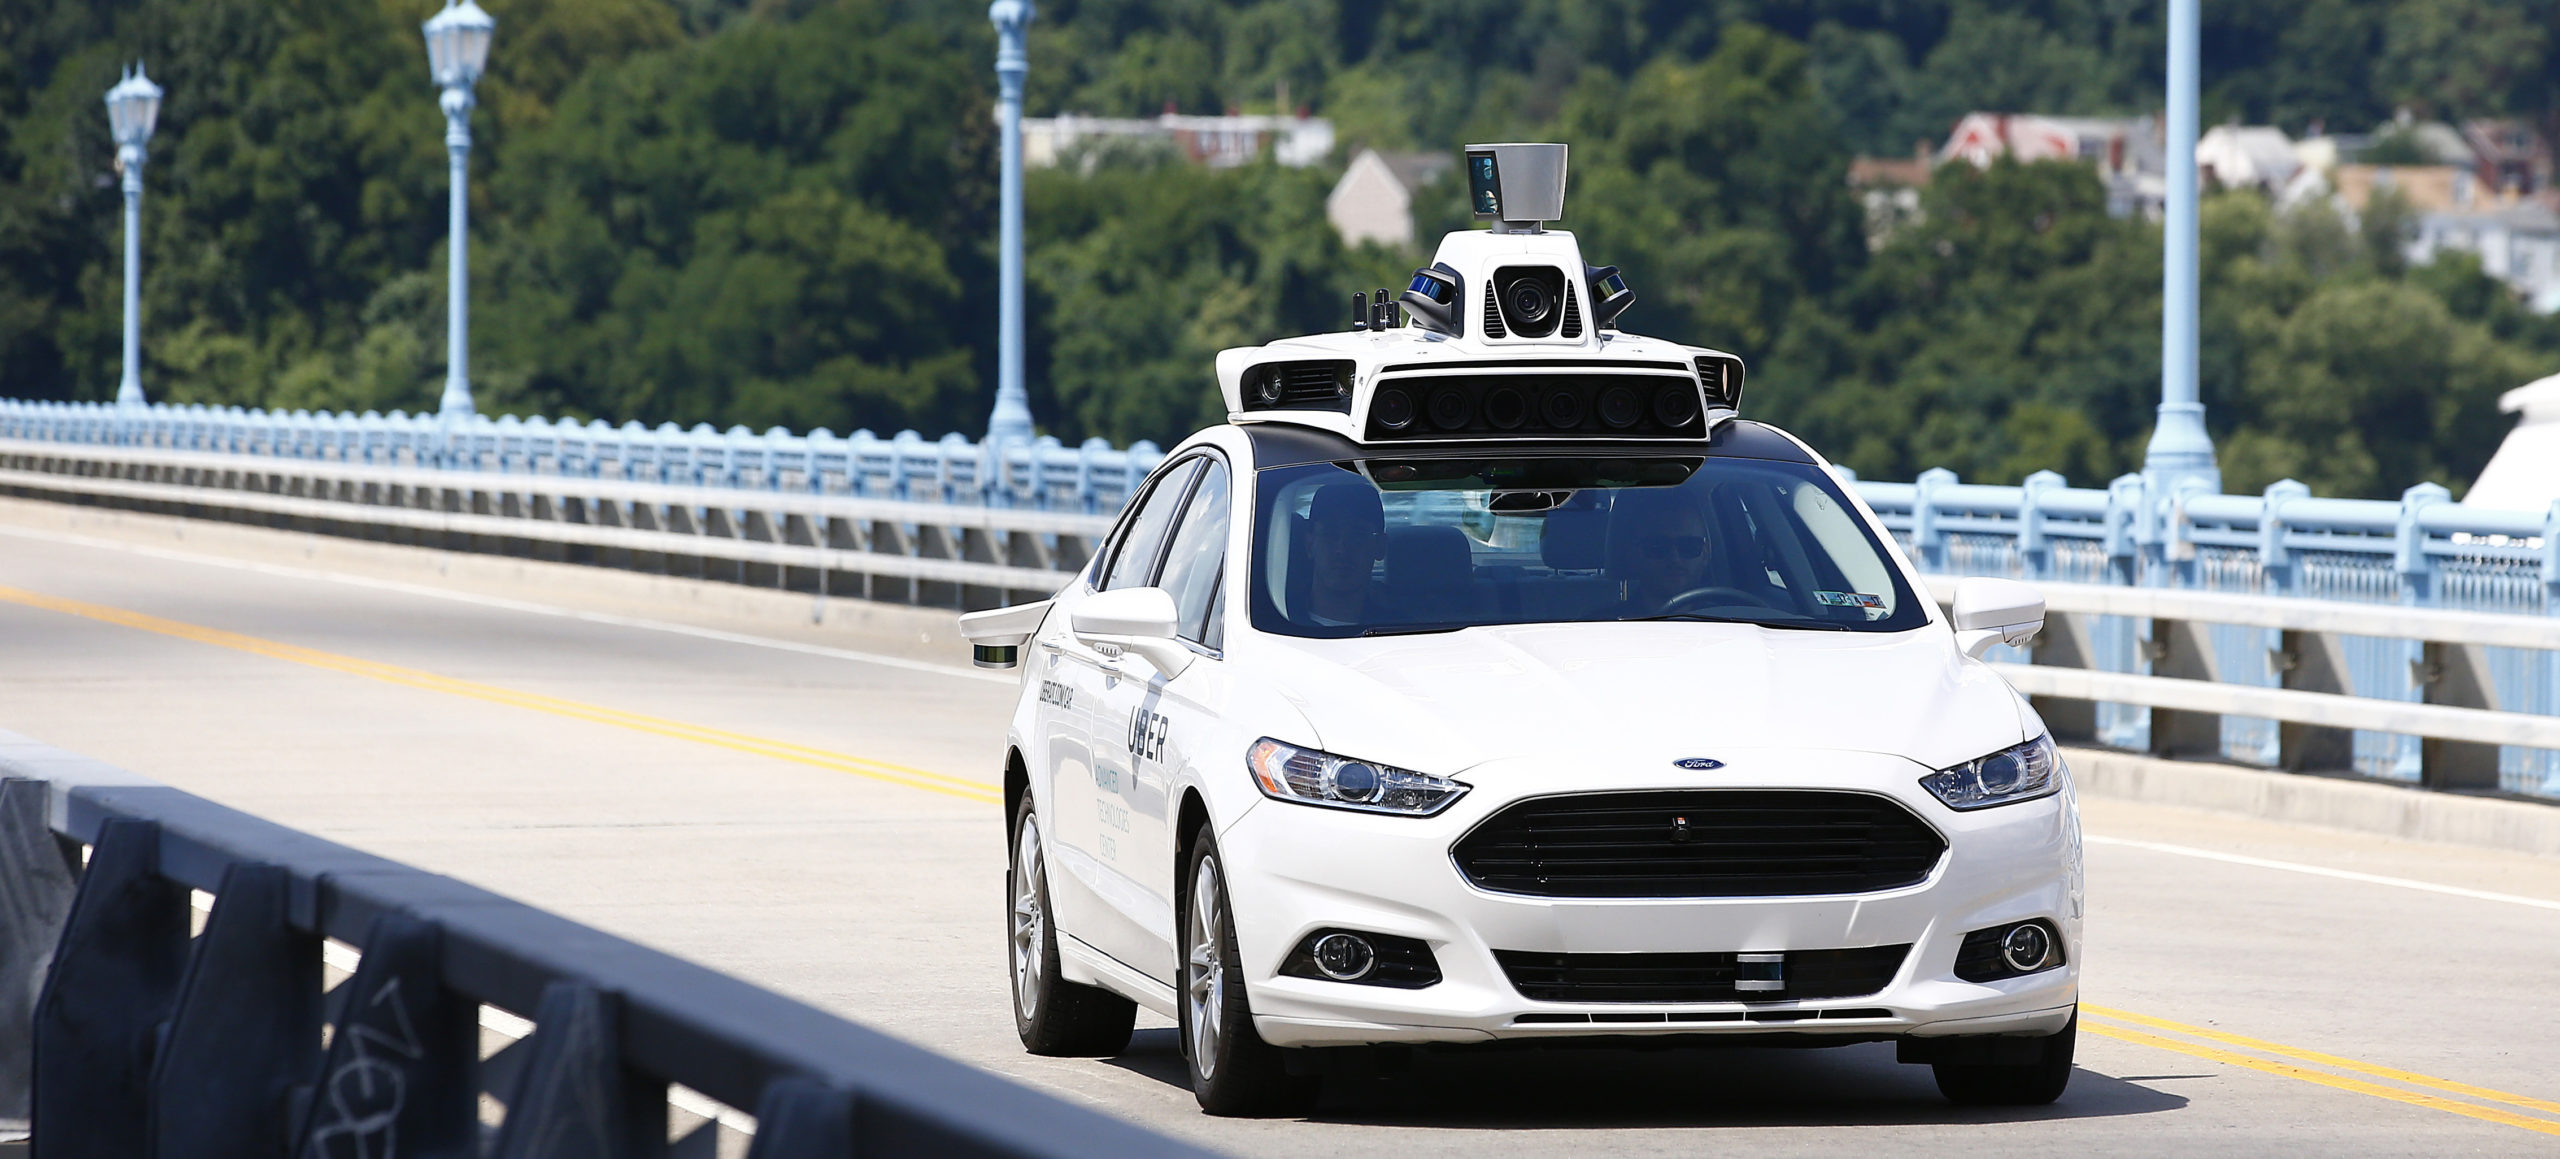 Don’t Believe The Hype About A Driverless Society Being Just A Few Years Away